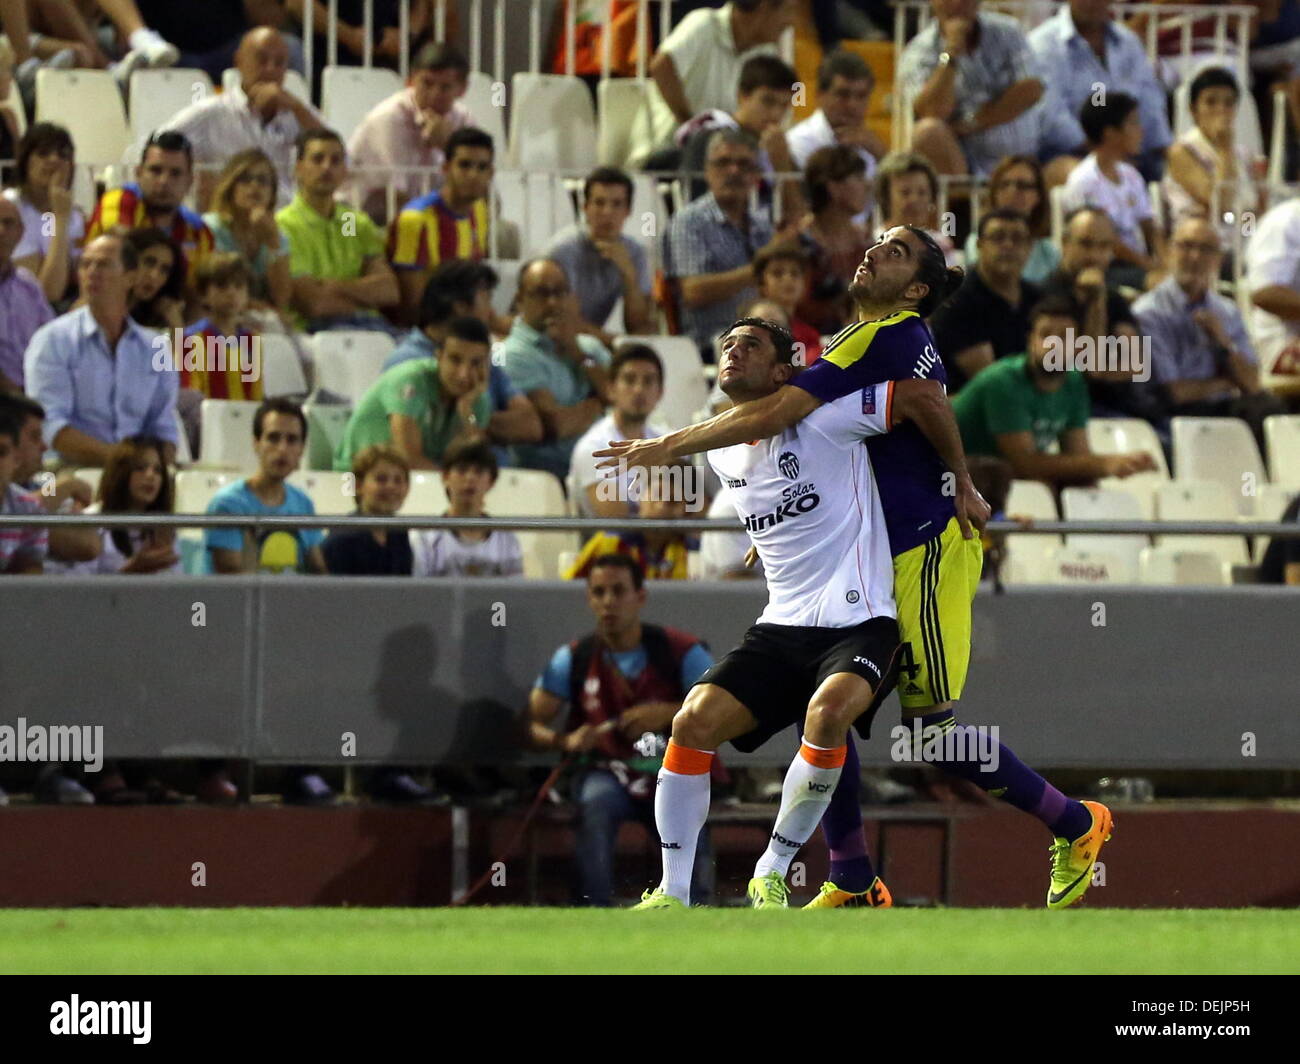 Valencia, Spain. Thursday 19 September 2013 Pictured L-R: Helder Postiga of Valencia challenged by Chico Flores of Swansea. Re: UEFA Europa League game against Valencia C.F v Swansea City FC, at the Estadio Mestalla, Spain, Credit:  D Legakis/Alamy Live News Stock Photo